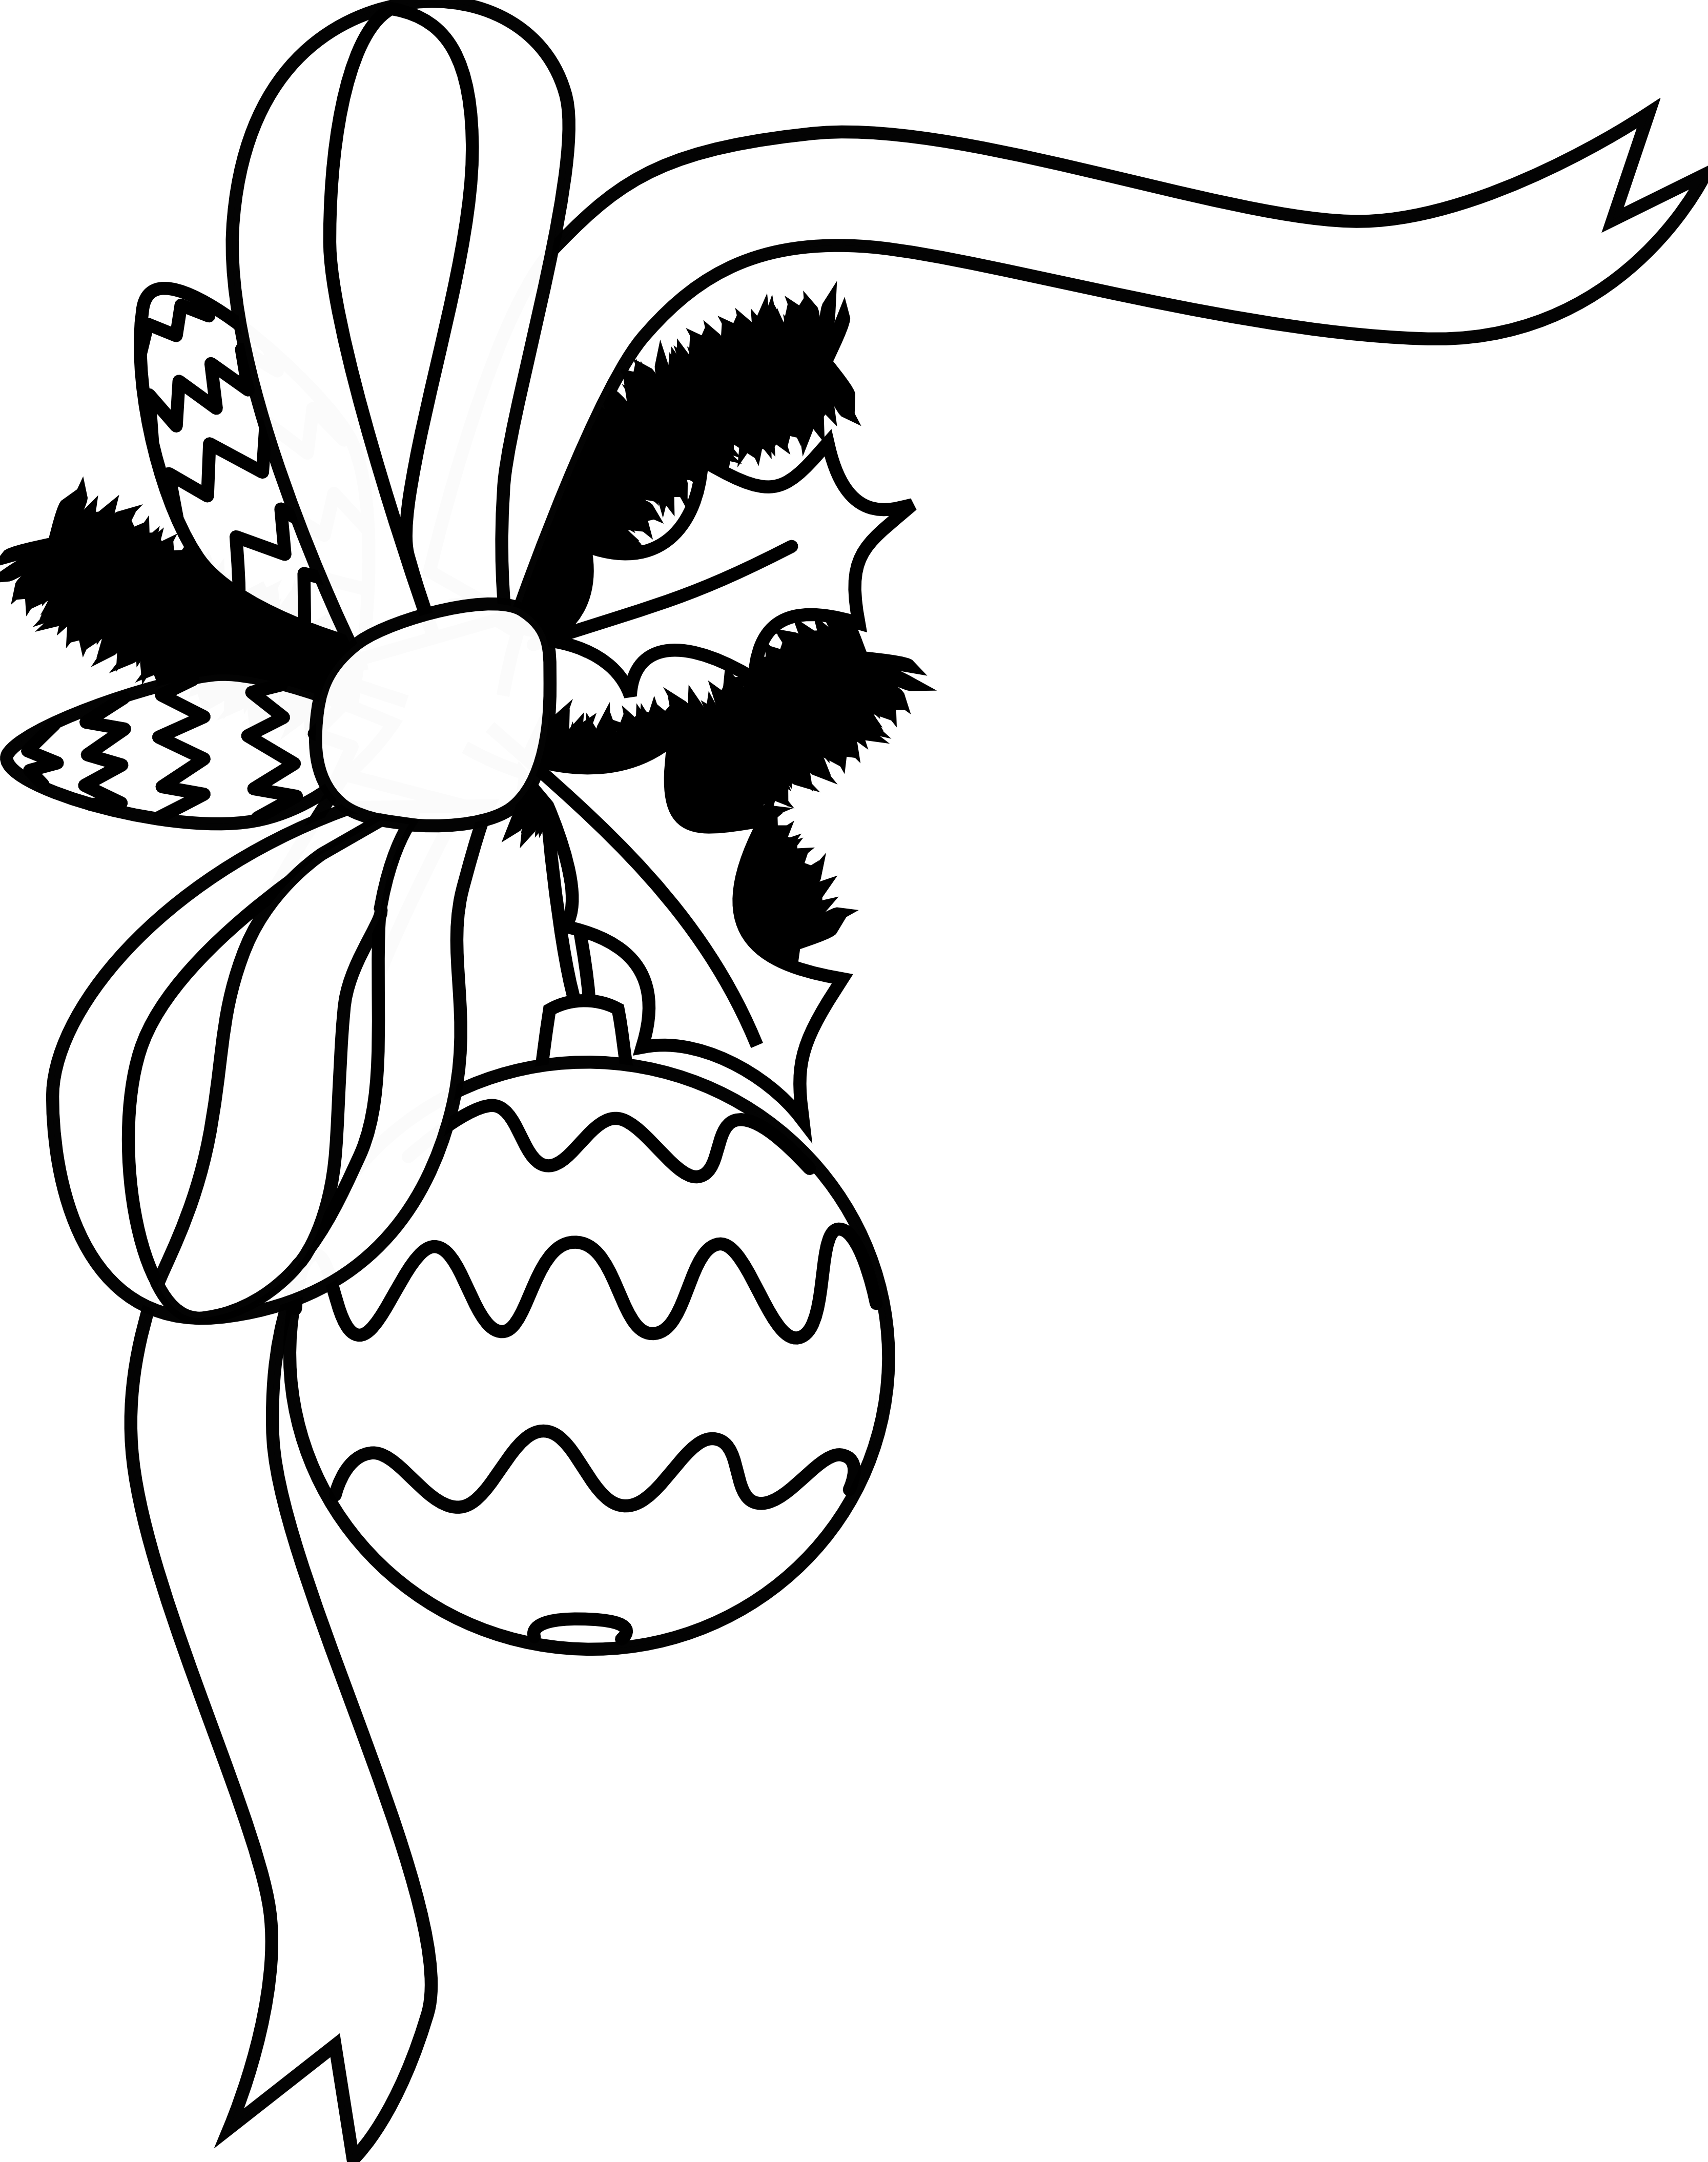 Whip clipart black and white. Free christmas images download